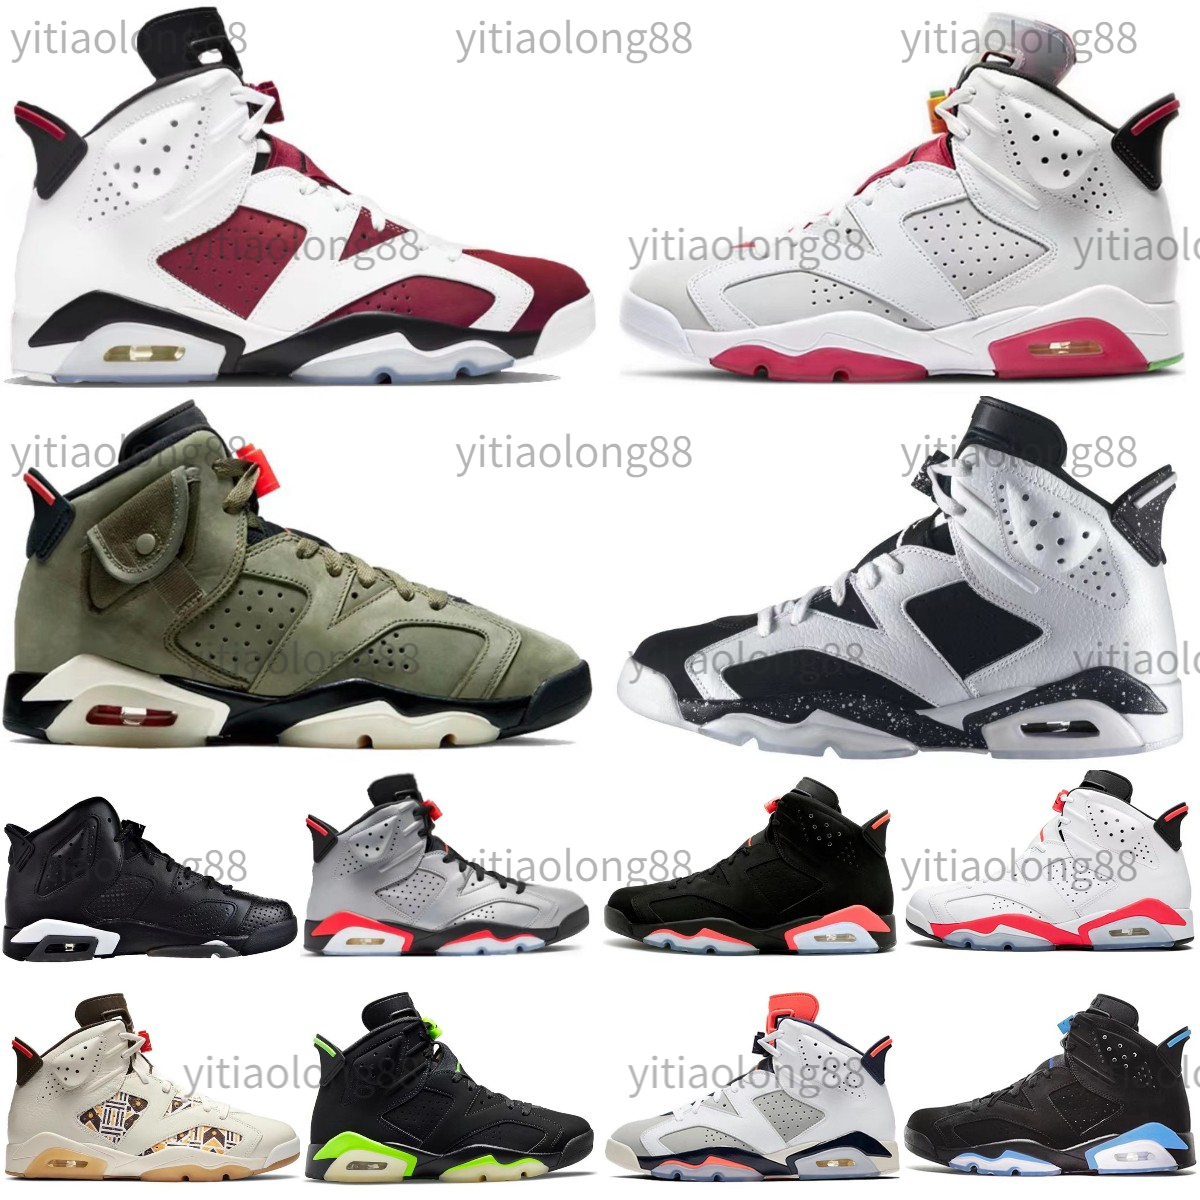 

'10-15 Day Delivery High Basketball Shoes Bordeaux 6s Mint Foam Electric Green Midnight Navy DMP UNC Cactus Tinker Men's Coach Spare Hare Fashion Athletic Sneakers, Box